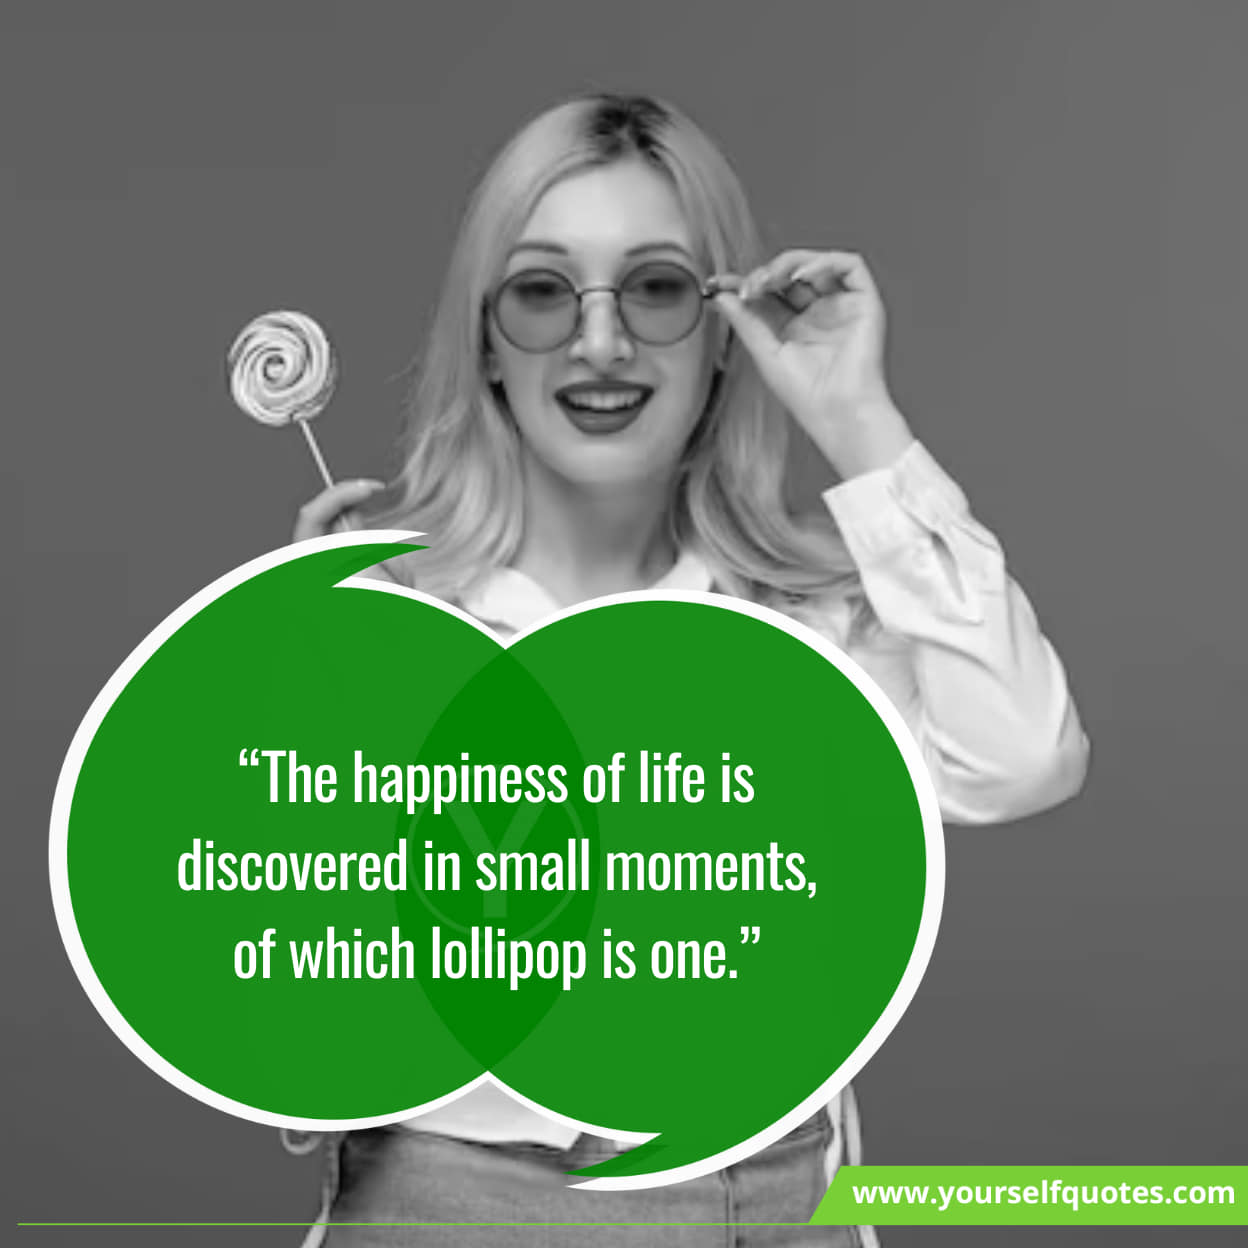 Celebrating National Lollipop Day with quotes